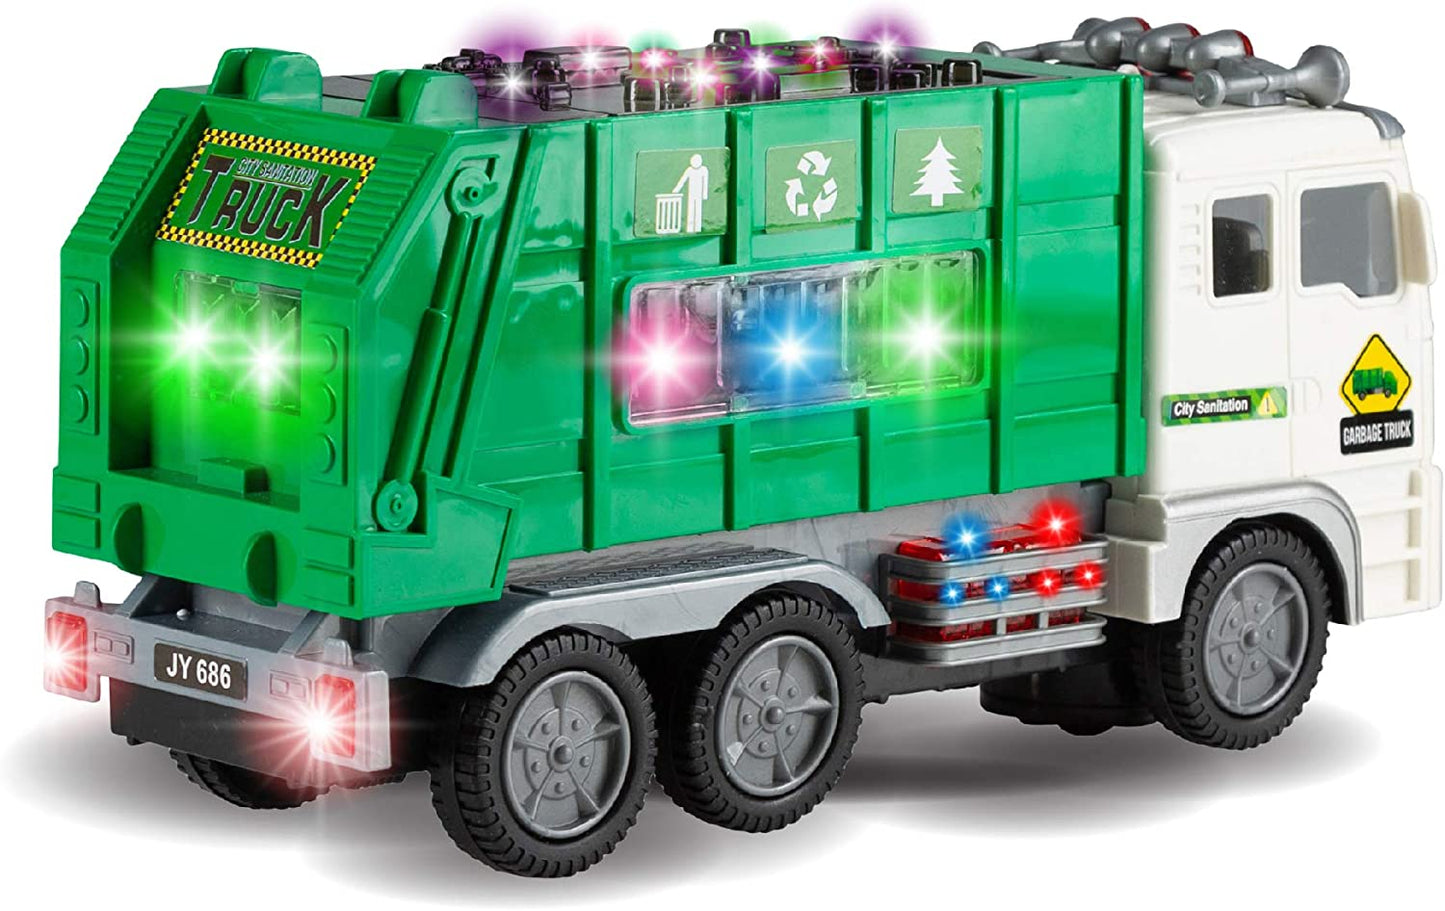 Toy Garbage Truck for Kids with 4D Lights and Sounds - Battery Operated Automatic Bump & Go Car - Sanitation Truck Stickers